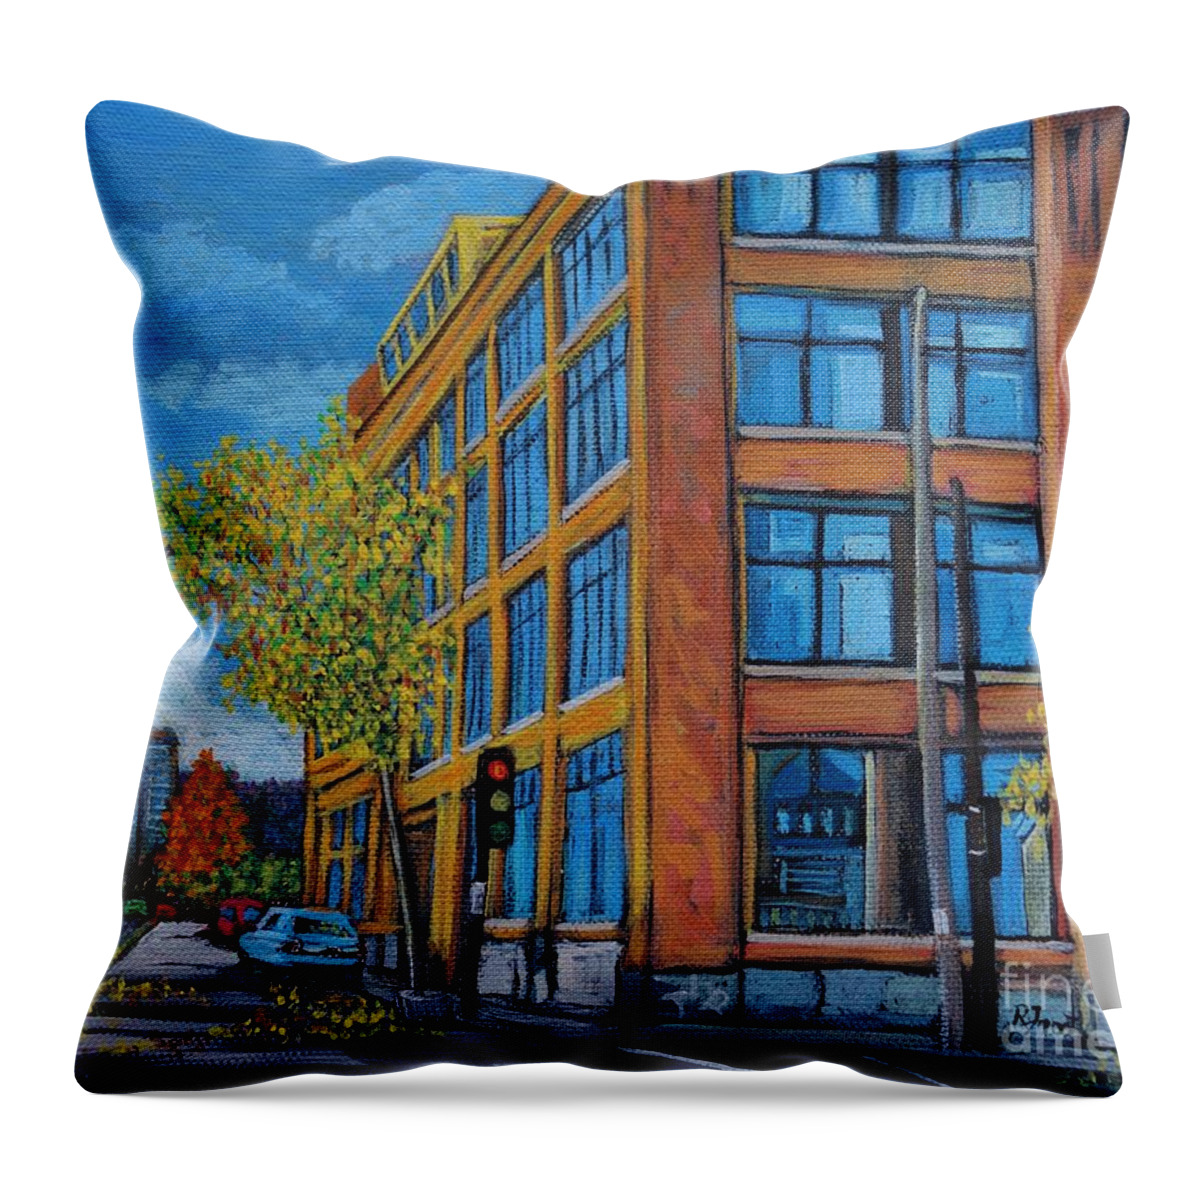 Montreal Throw Pillow featuring the painting Street Study Montreal by Reb Frost